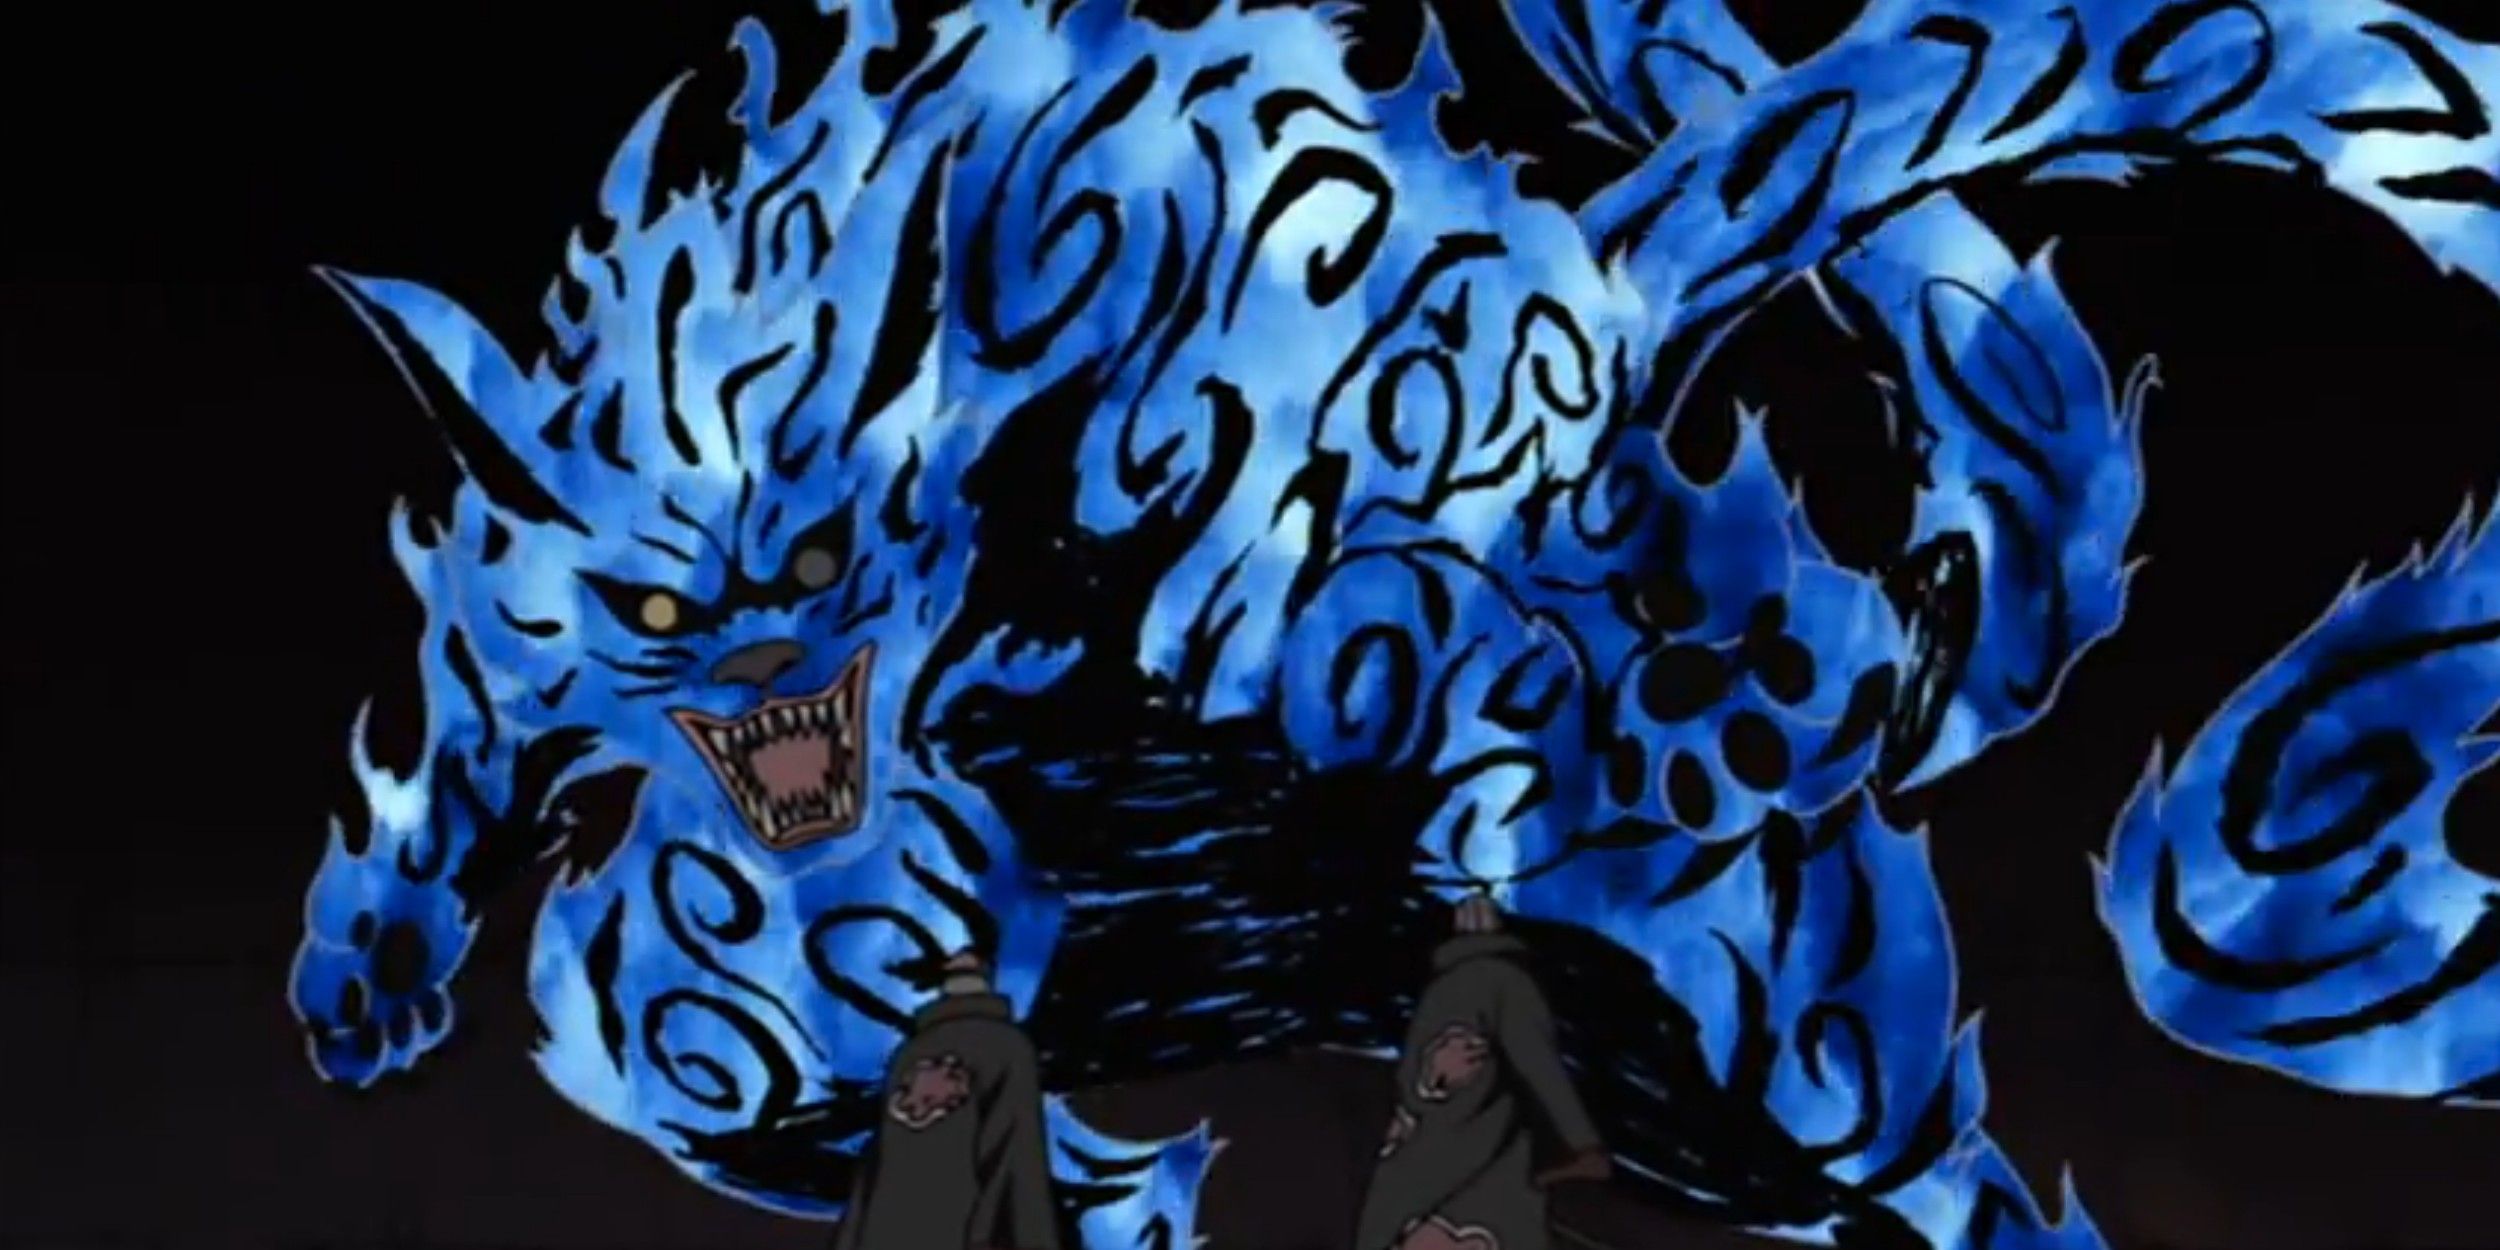 how many tailed beasts are there